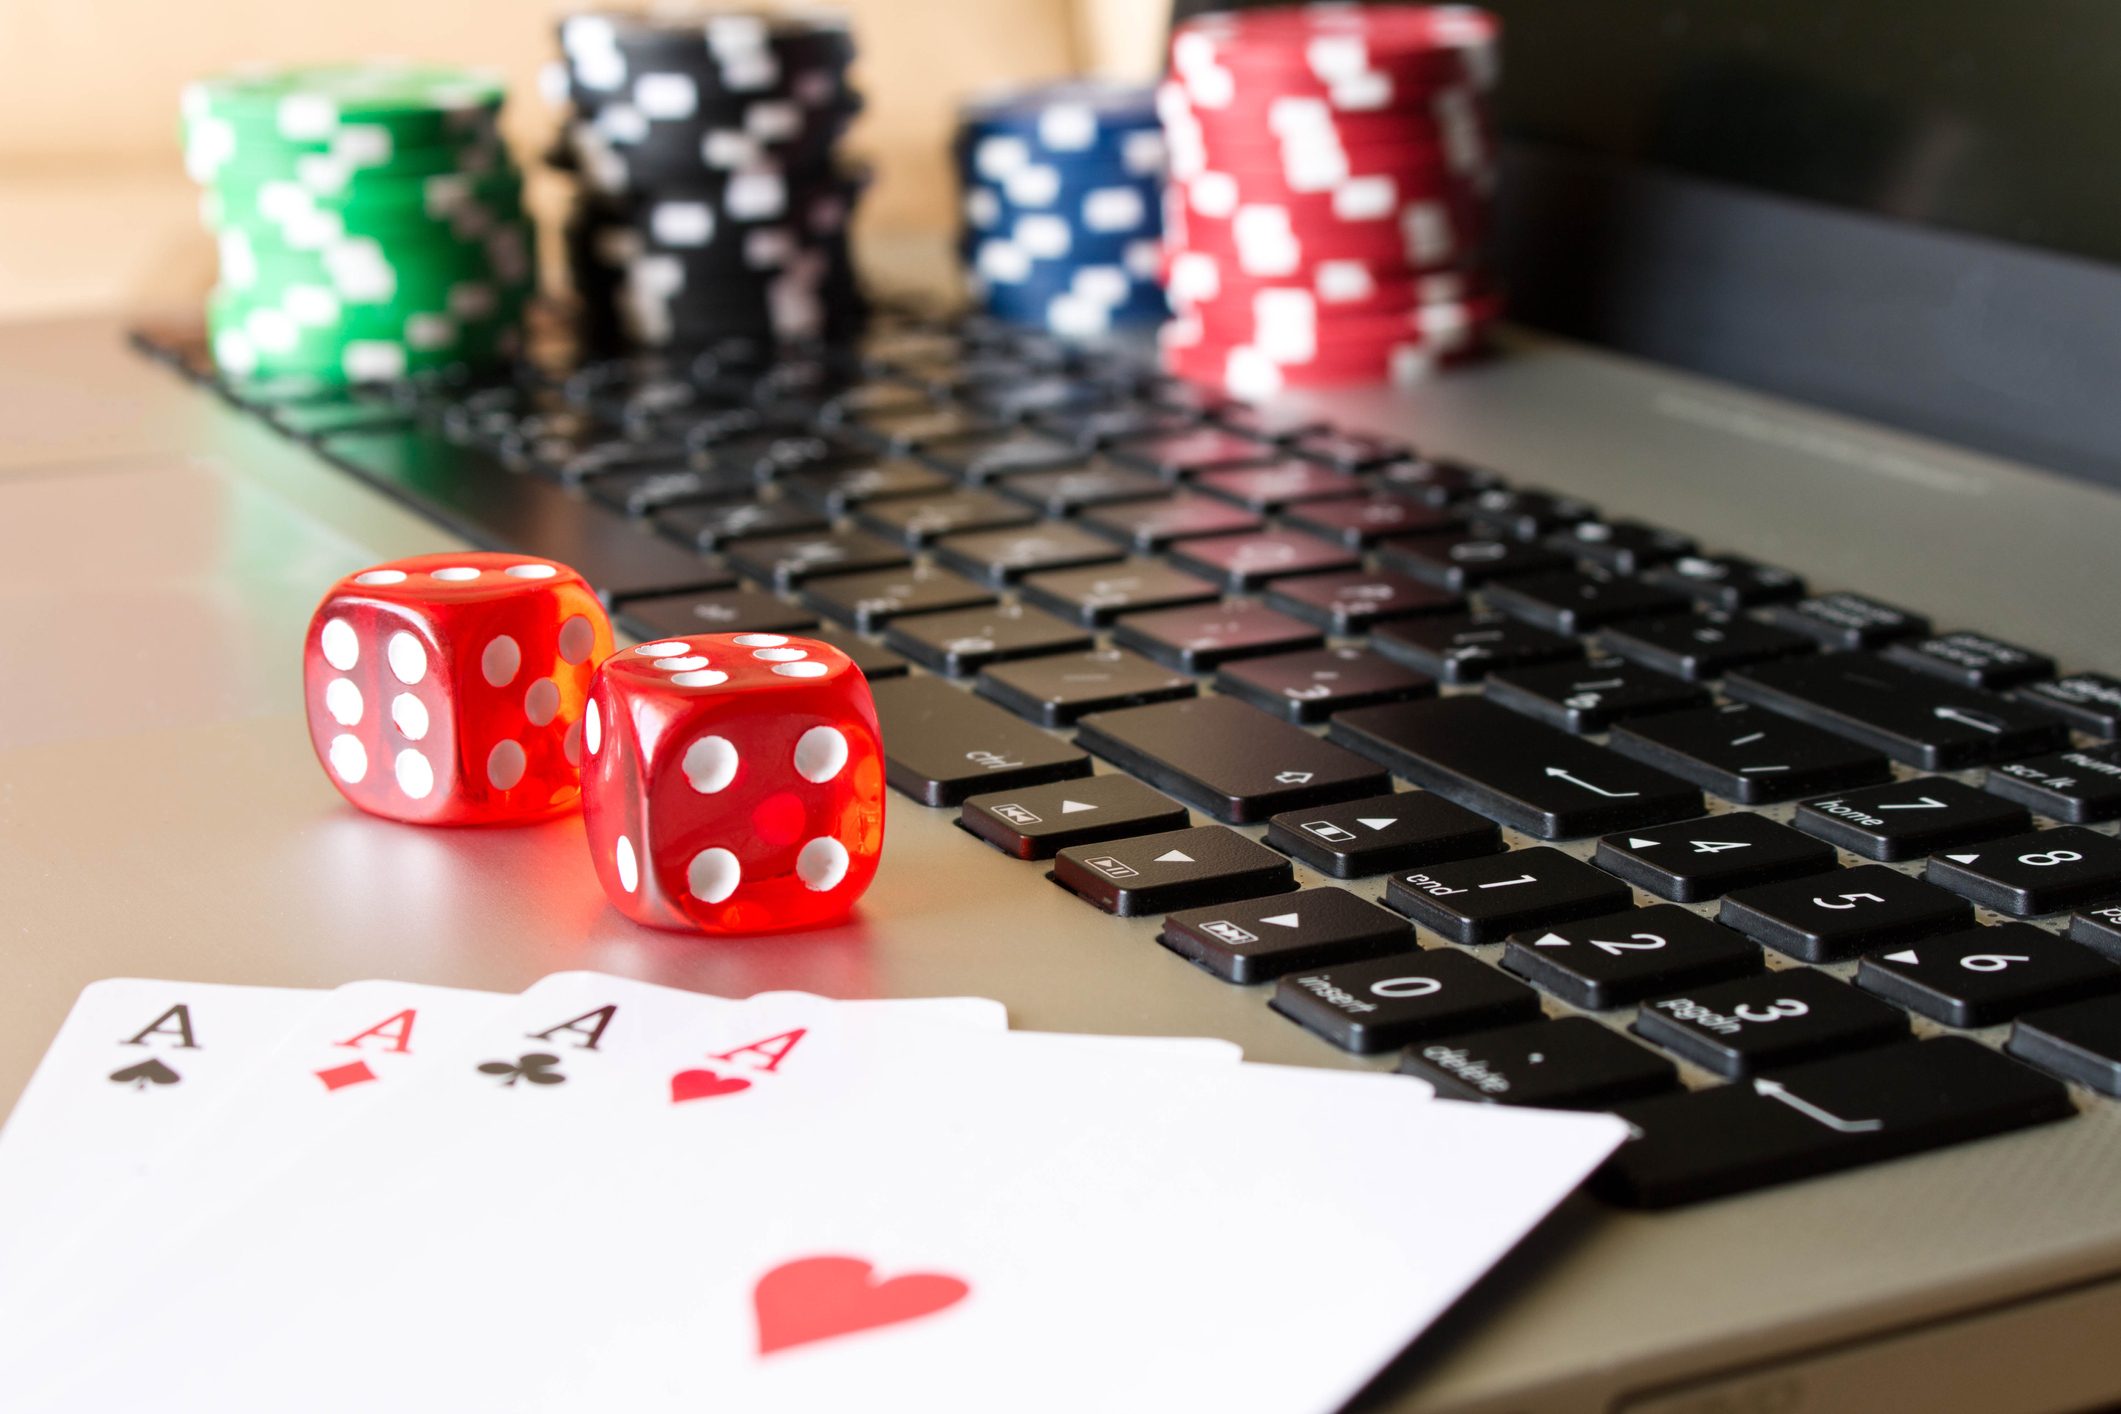 dice-poker-chips-and-playing-cards-on-laptop-the-concept-of-online-games